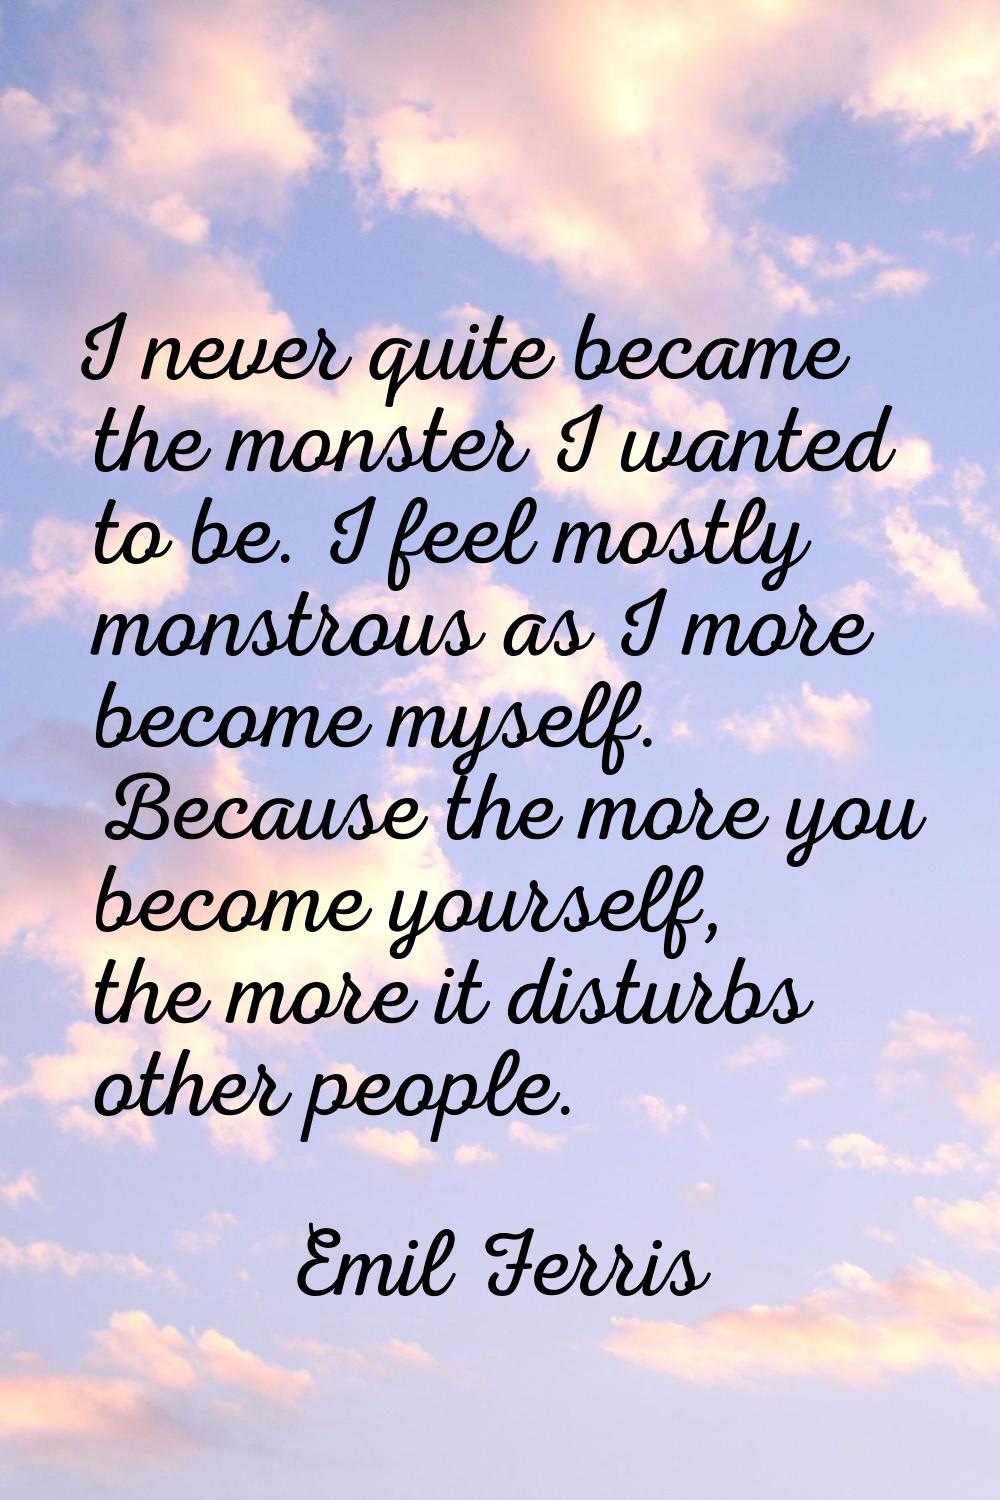 I never quite became the monster I wanted to be. I feel mostly monstrous as I more become myself. B